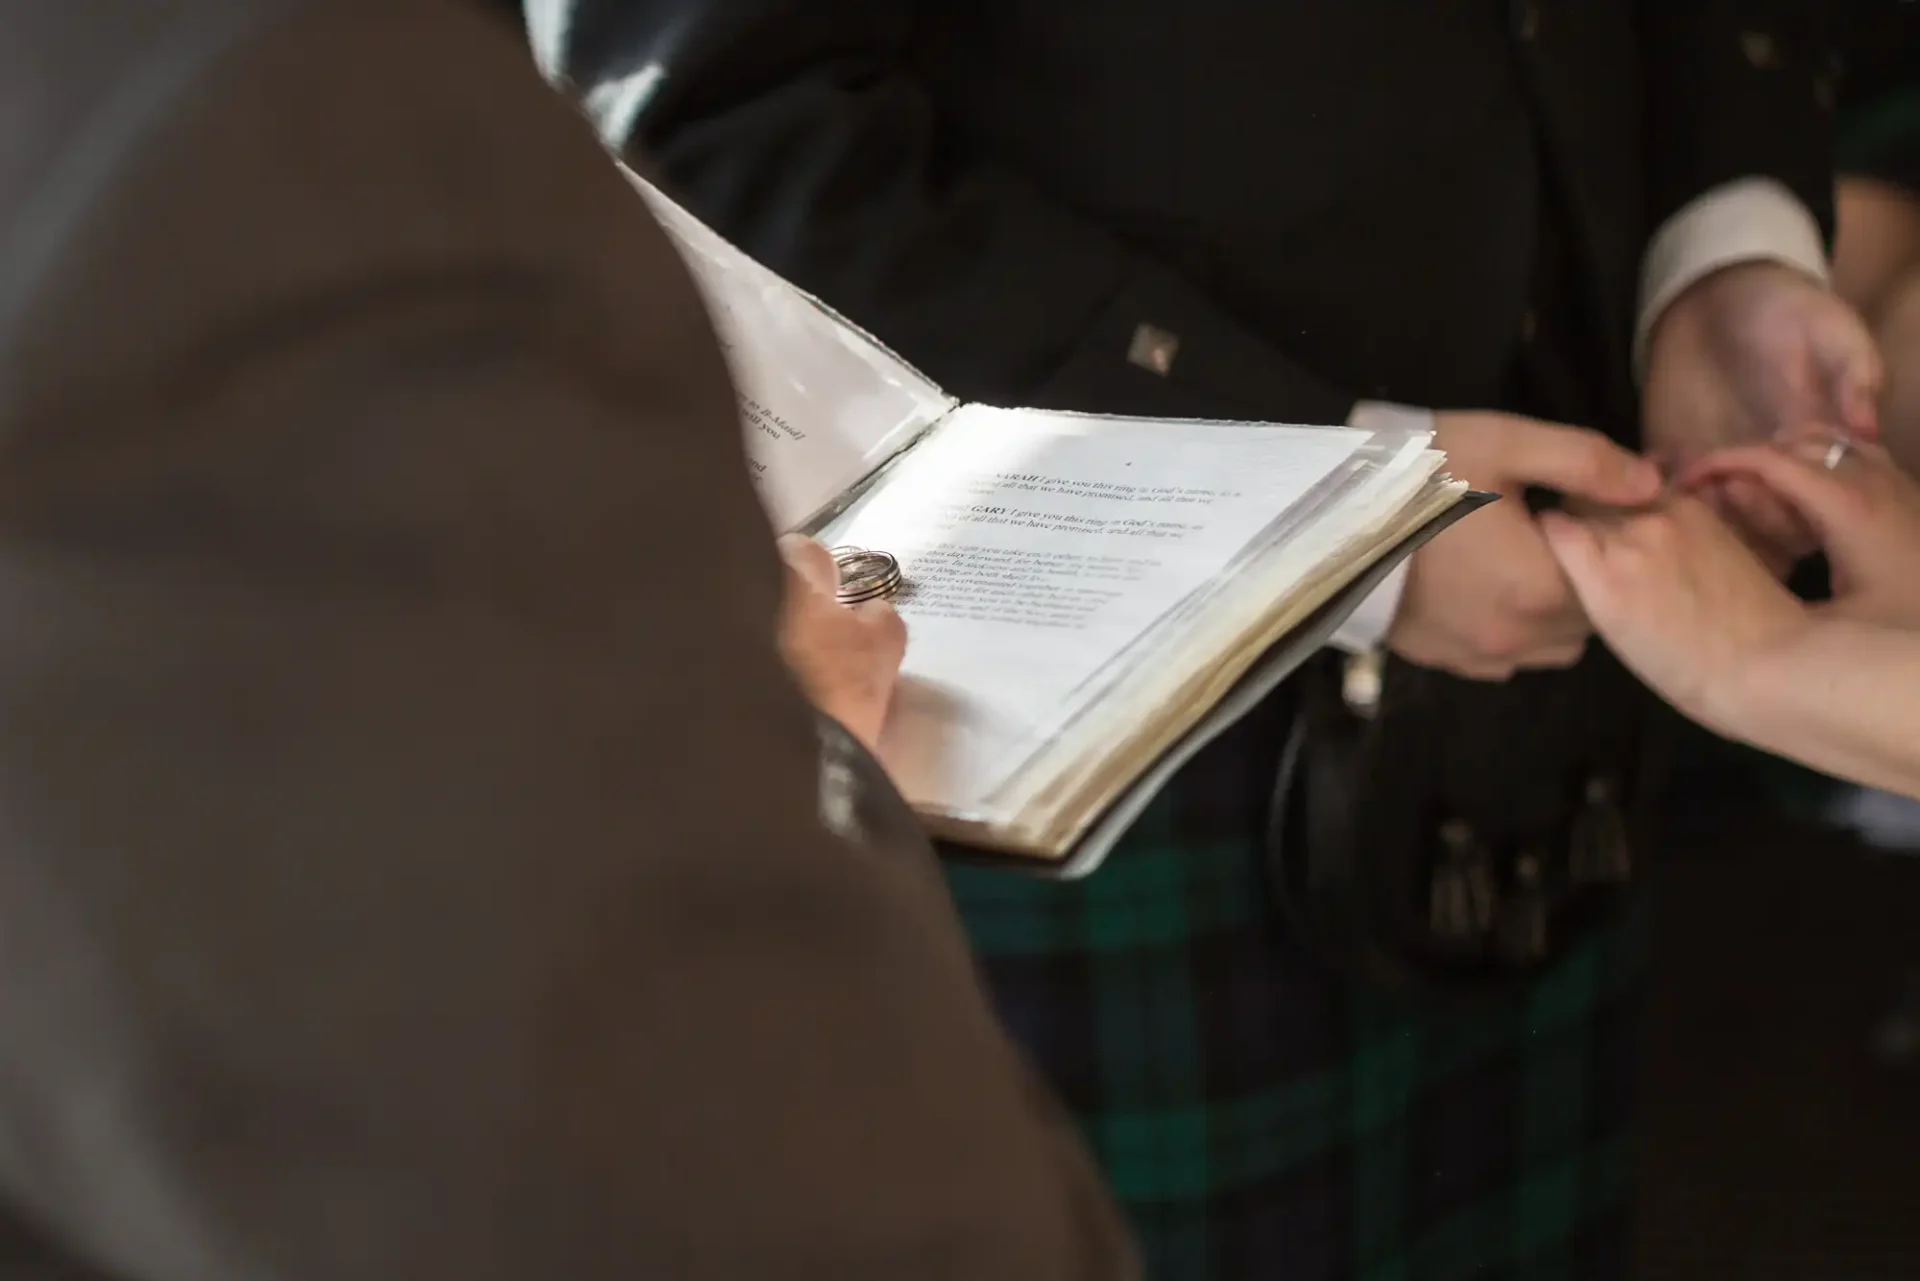 Close-up of a wedding ceremony with hands exchanging rings, officiant holding a book with text, and groom in kilt visible.